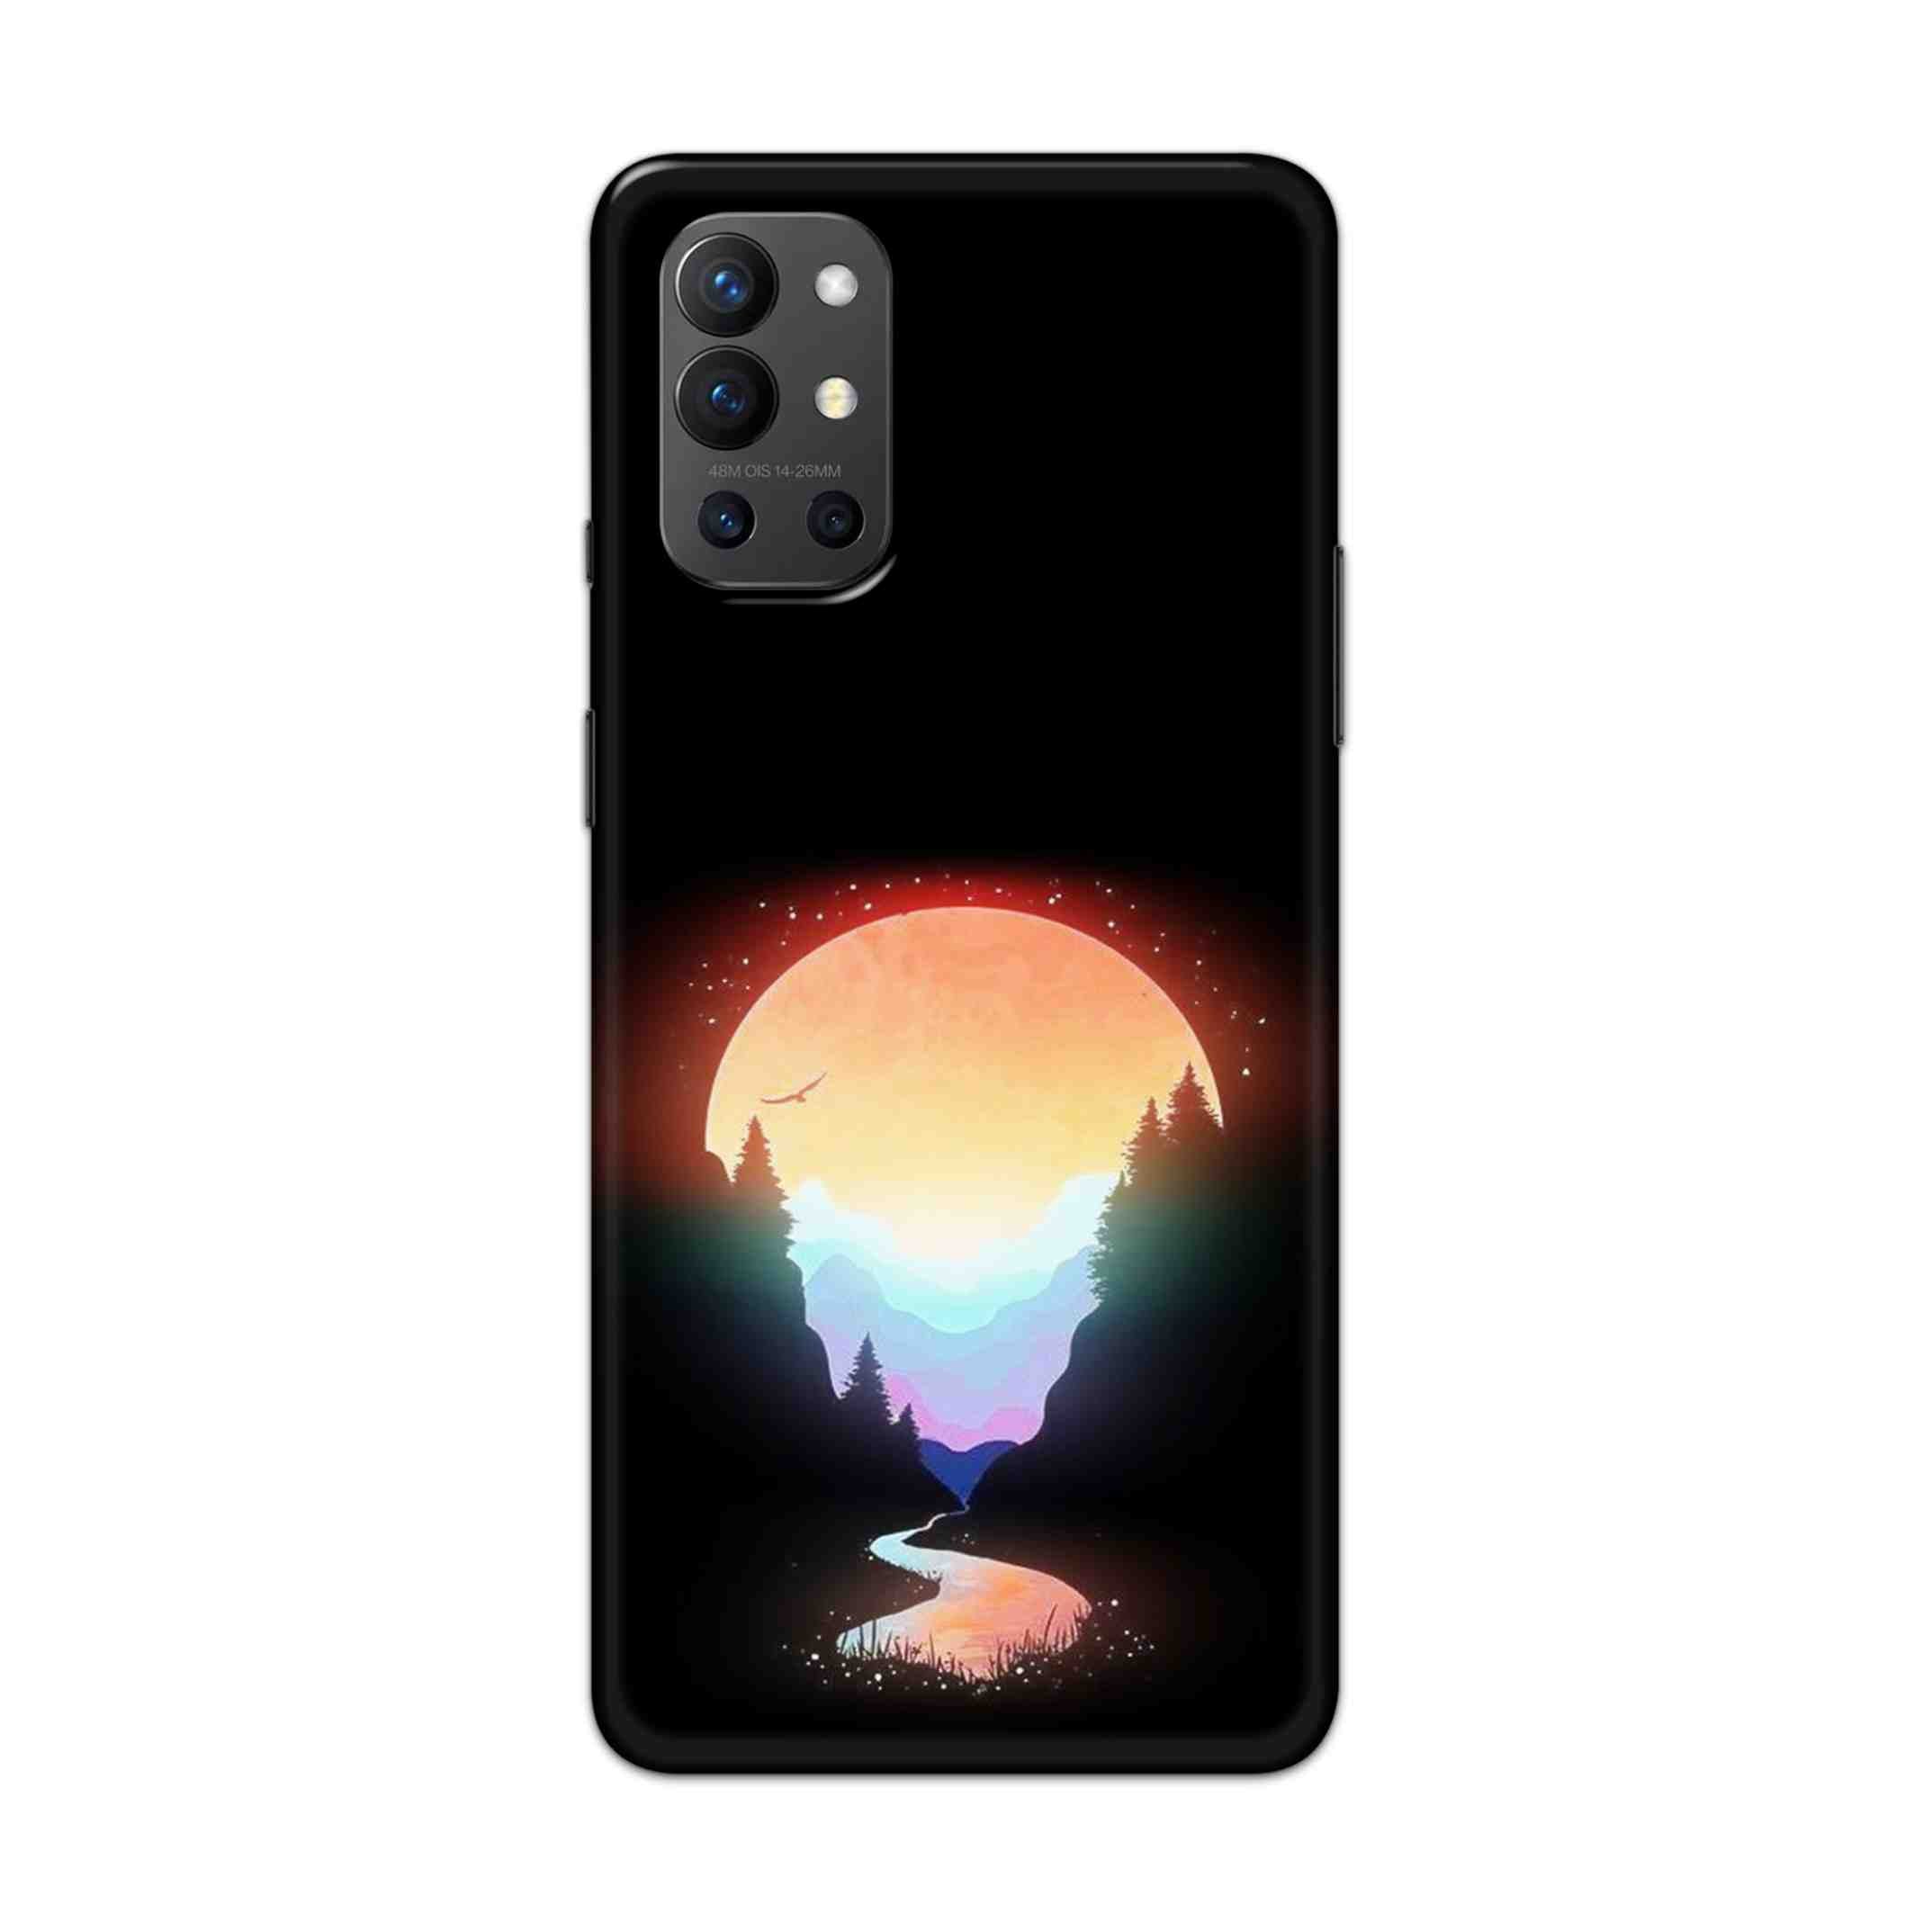 Buy Rainbow Hard Back Mobile Phone Case Cover For OnePlus 9R / 8T Online